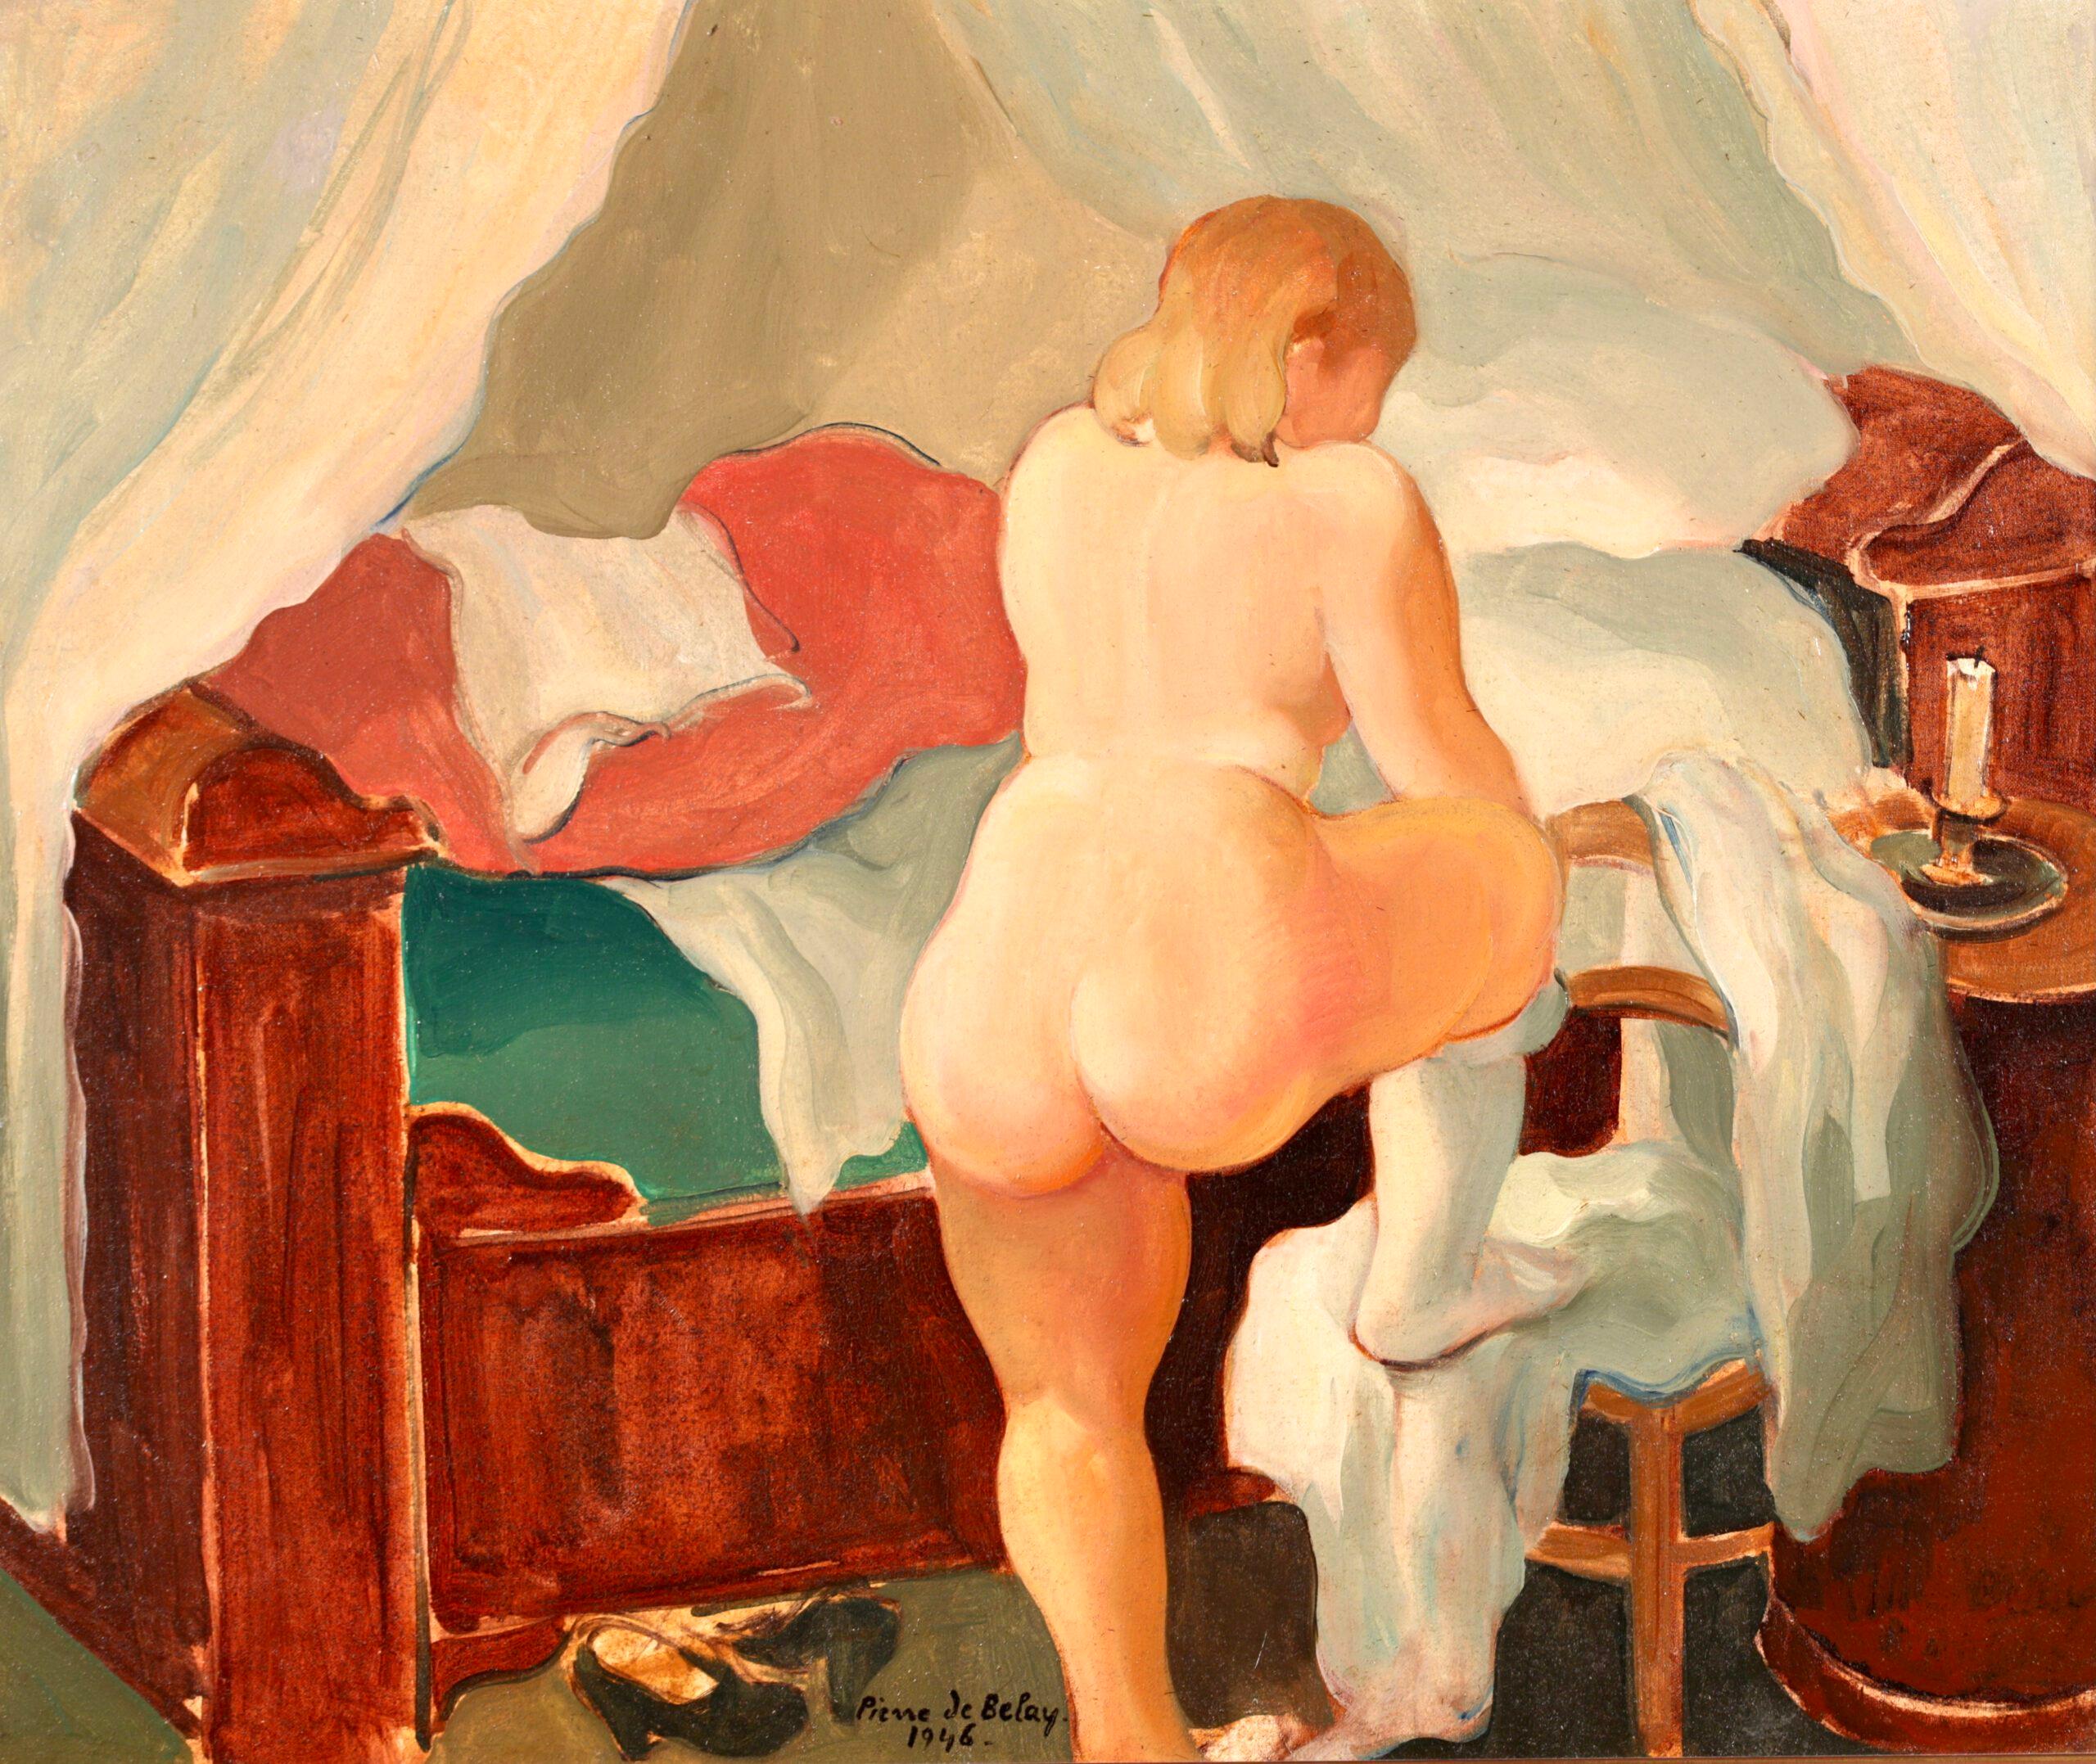 Signed and dated nude figure in interior oil on canvas by French post impressionist painter Pierre De Belay. This work depicts a painting of Pierre De Belay's wife - Helene. Here she is seen preparing for bed. The work was gifted to Roland & Denise